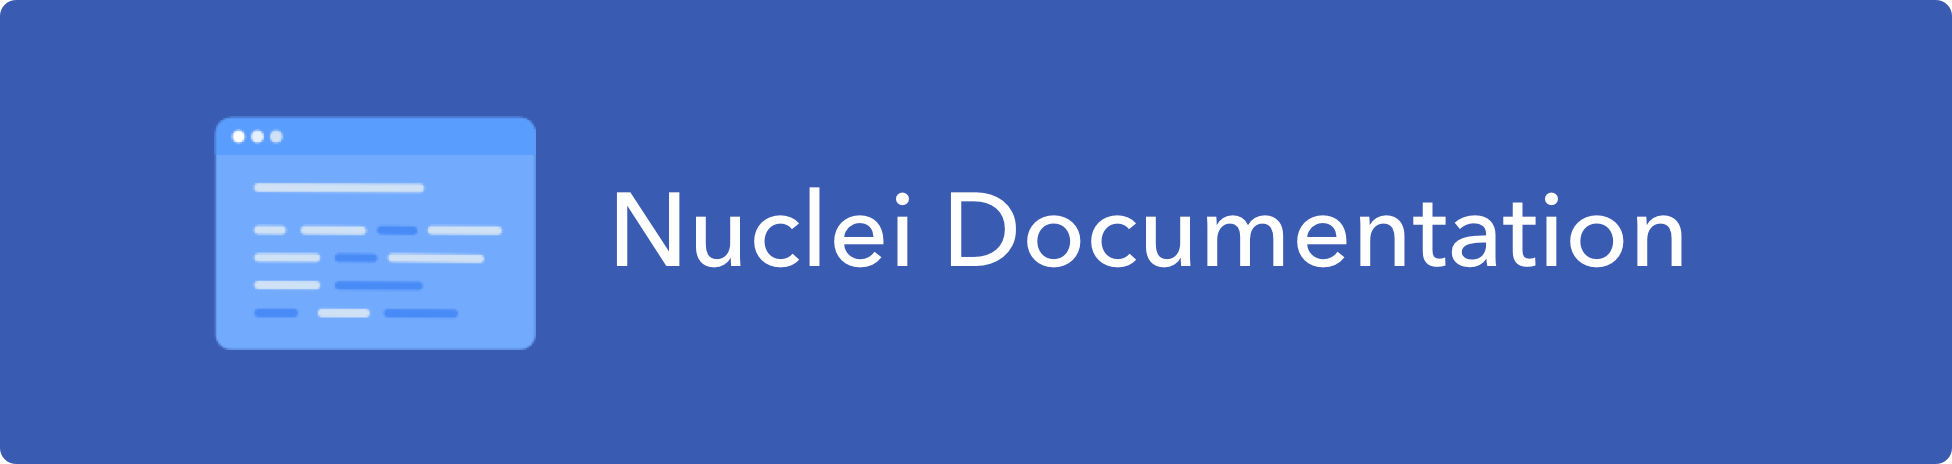 Check Nuclei Documentation